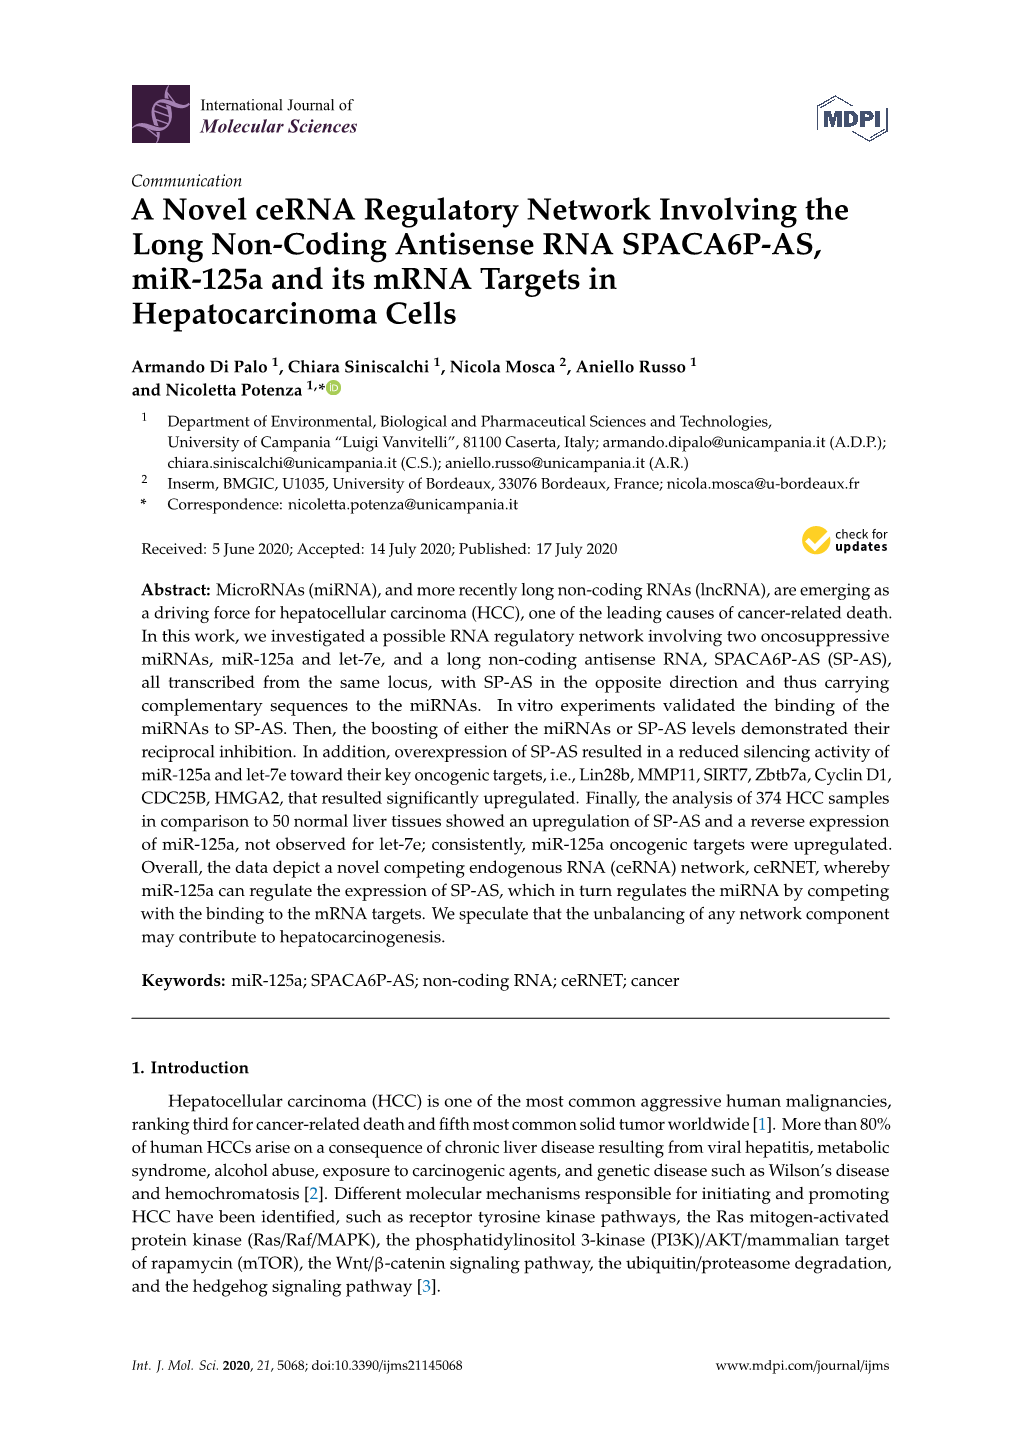 A Novel Cerna Regulatory Network Involving the Long Non-Coding Antisense RNA SPACA6P-AS, Mir-125A and Its Mrna Targets in Hepatocarcinoma Cells